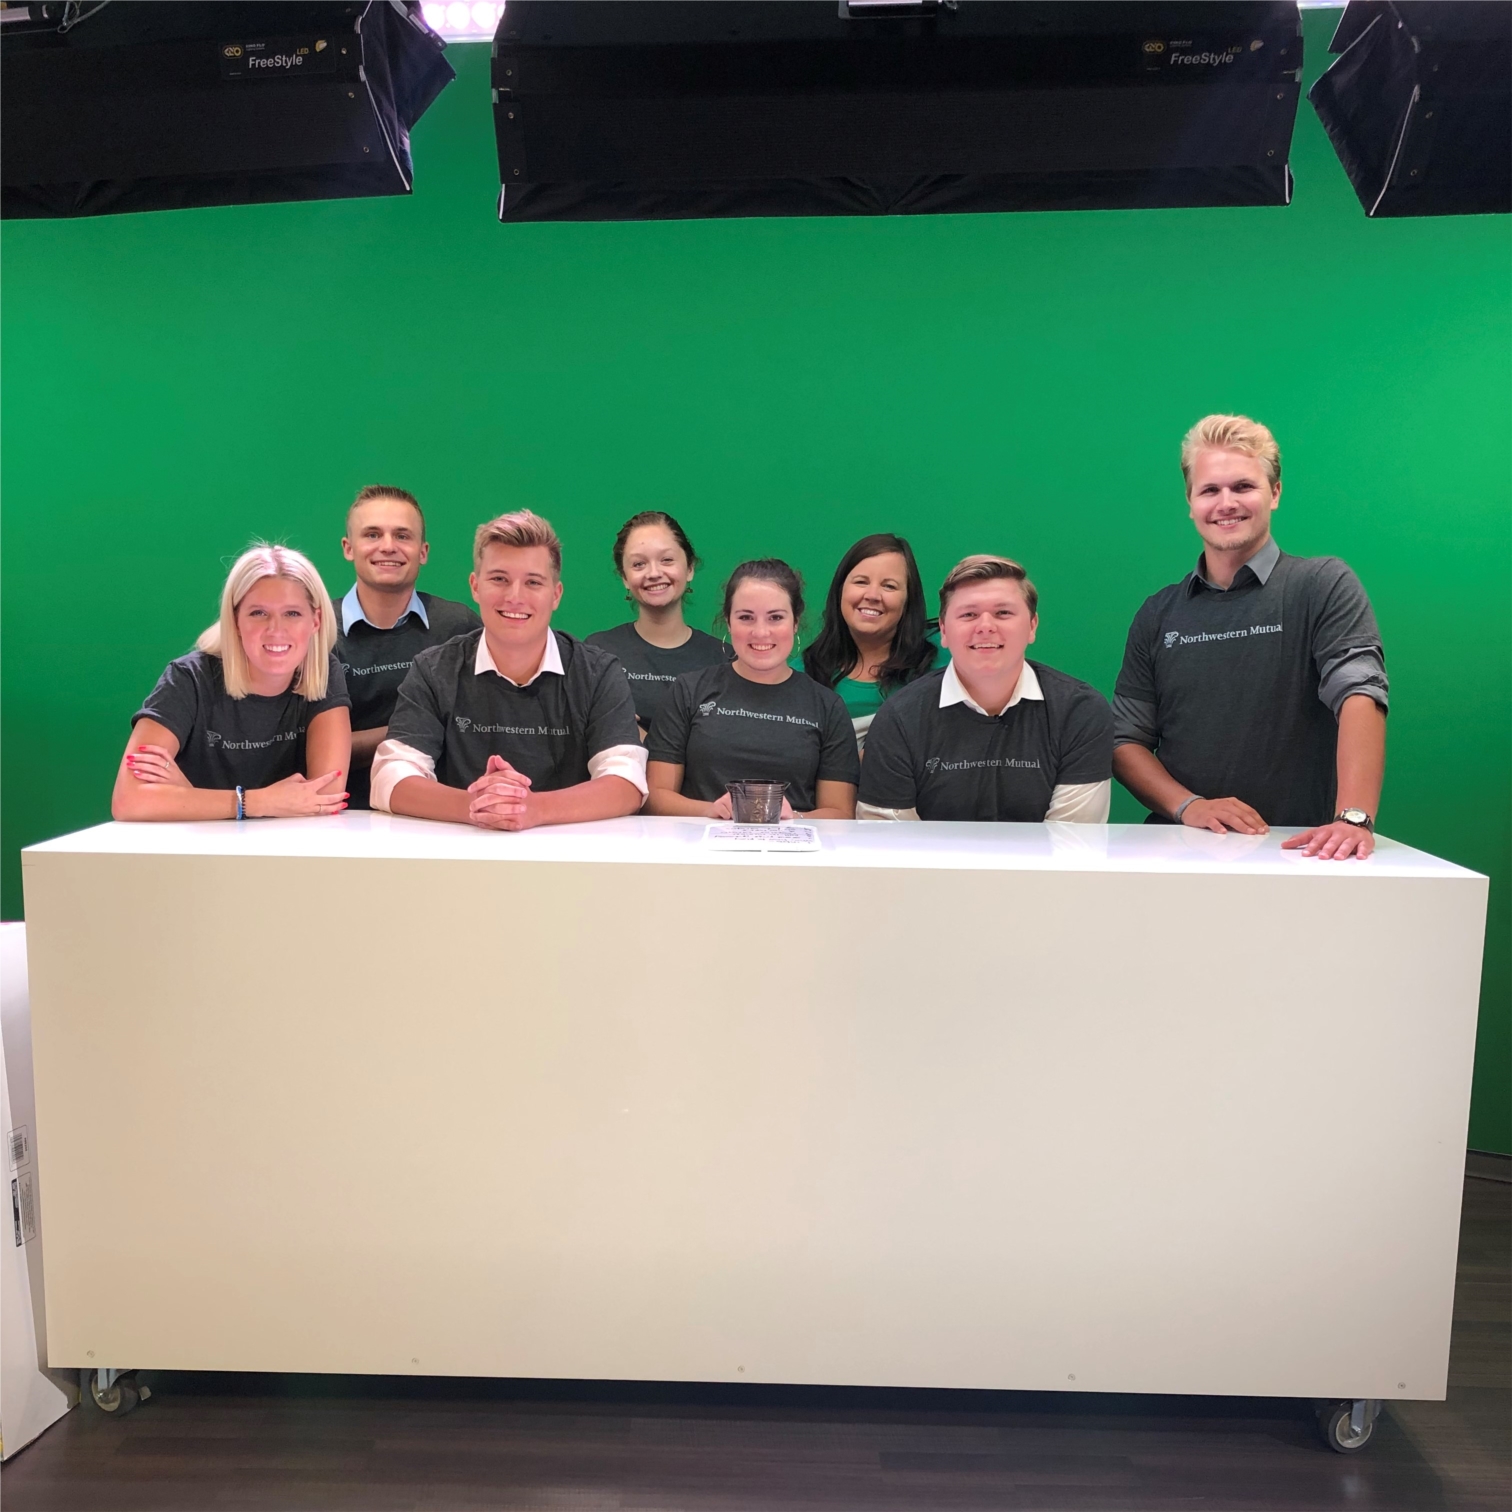 Interns from our Woodbury office spent a morning at the University of Minnesota Masonic Children's Hospital and helped organize the Zucker Family Suite and Broadcast Studio and broadcast bingo to every patient room in the hospital.